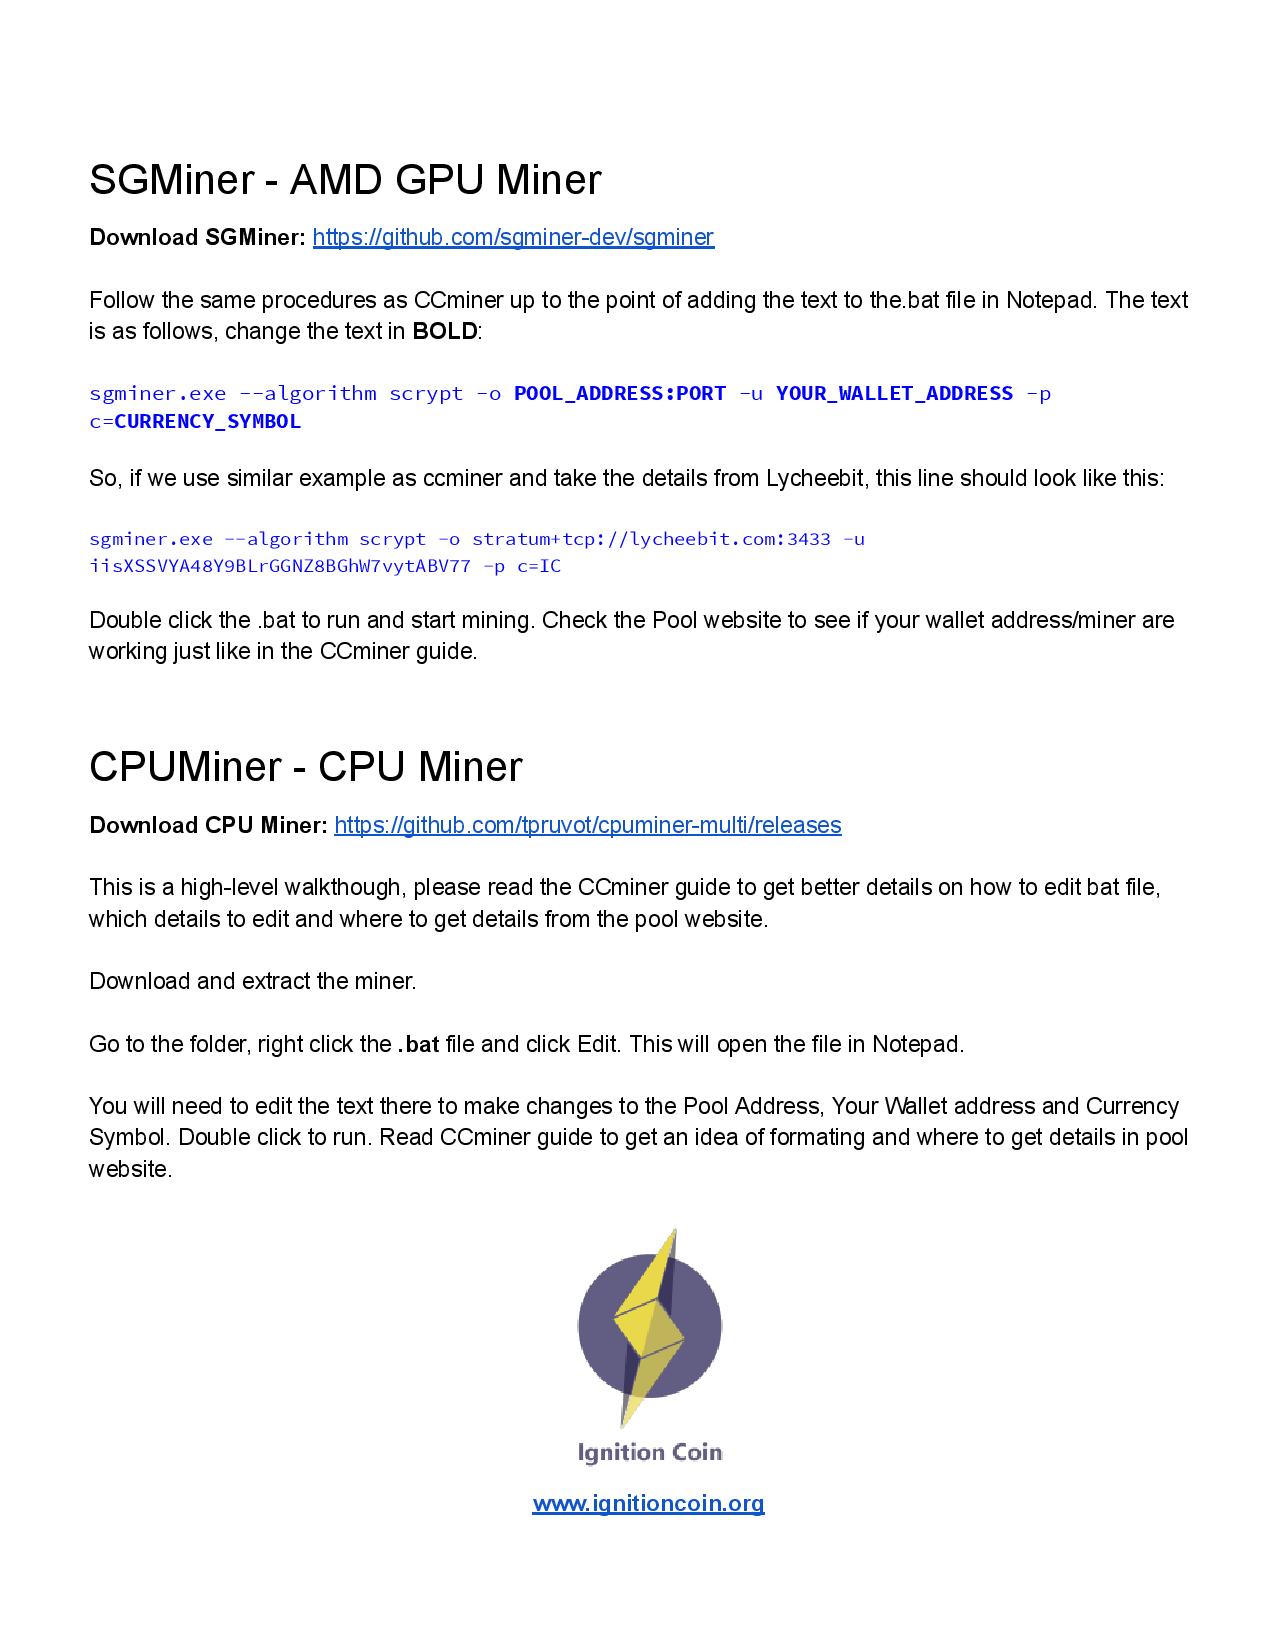 Ignition Coin Mining Guide for Windows - Google Docs-page-005.jpg